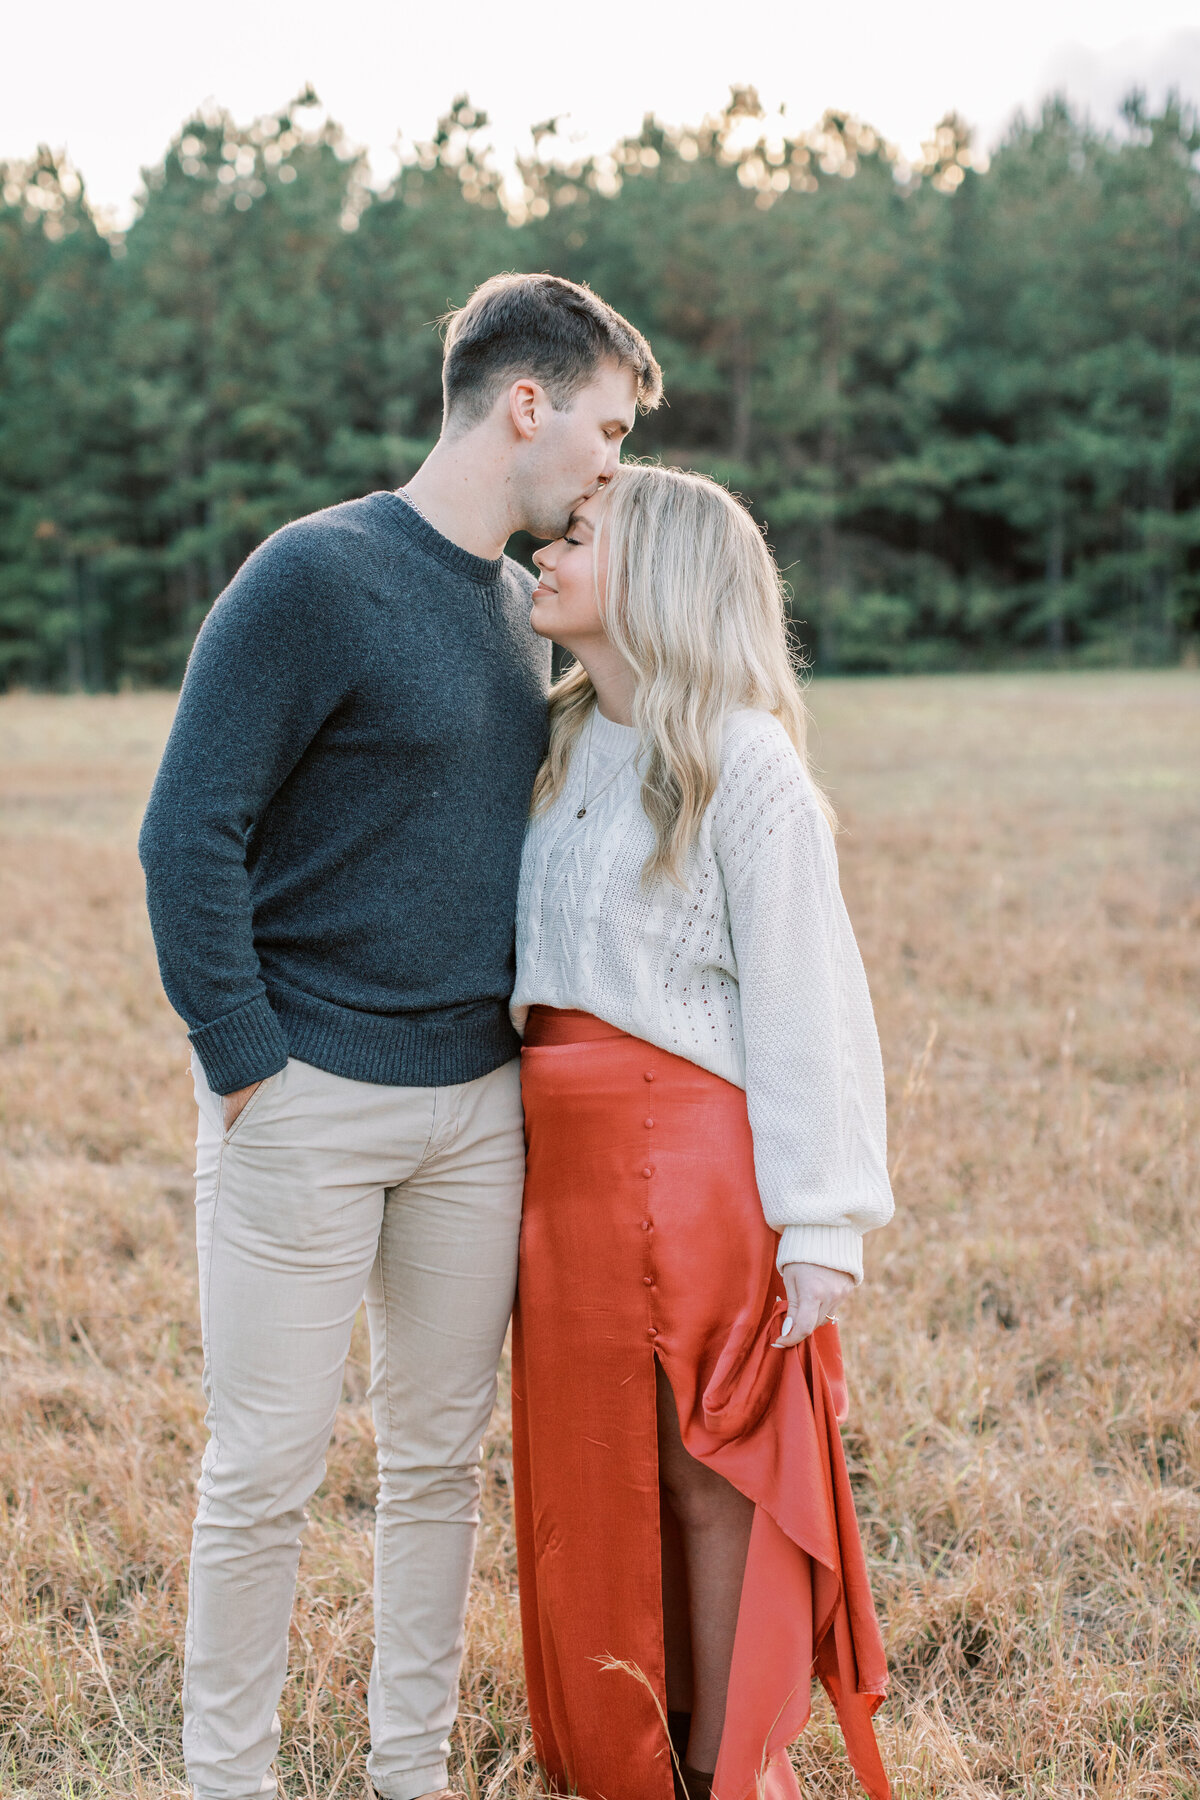 A couple kisses in a field surrounded by pine trees.